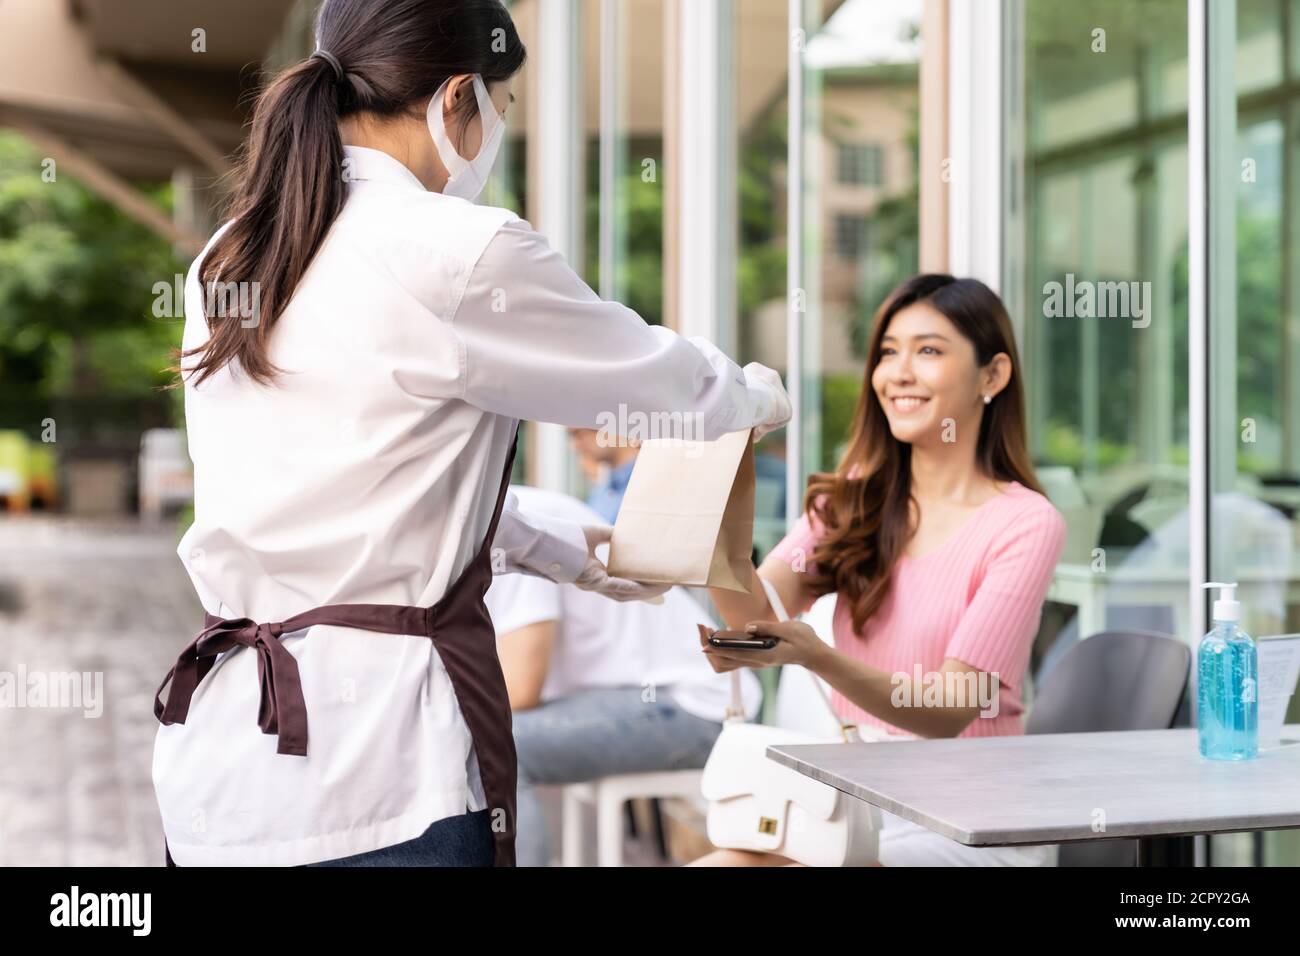 Back view of asian waitress with face mask give order of take out food bag to attractive woman female customer. Take away or take-out food service con Stock Photo